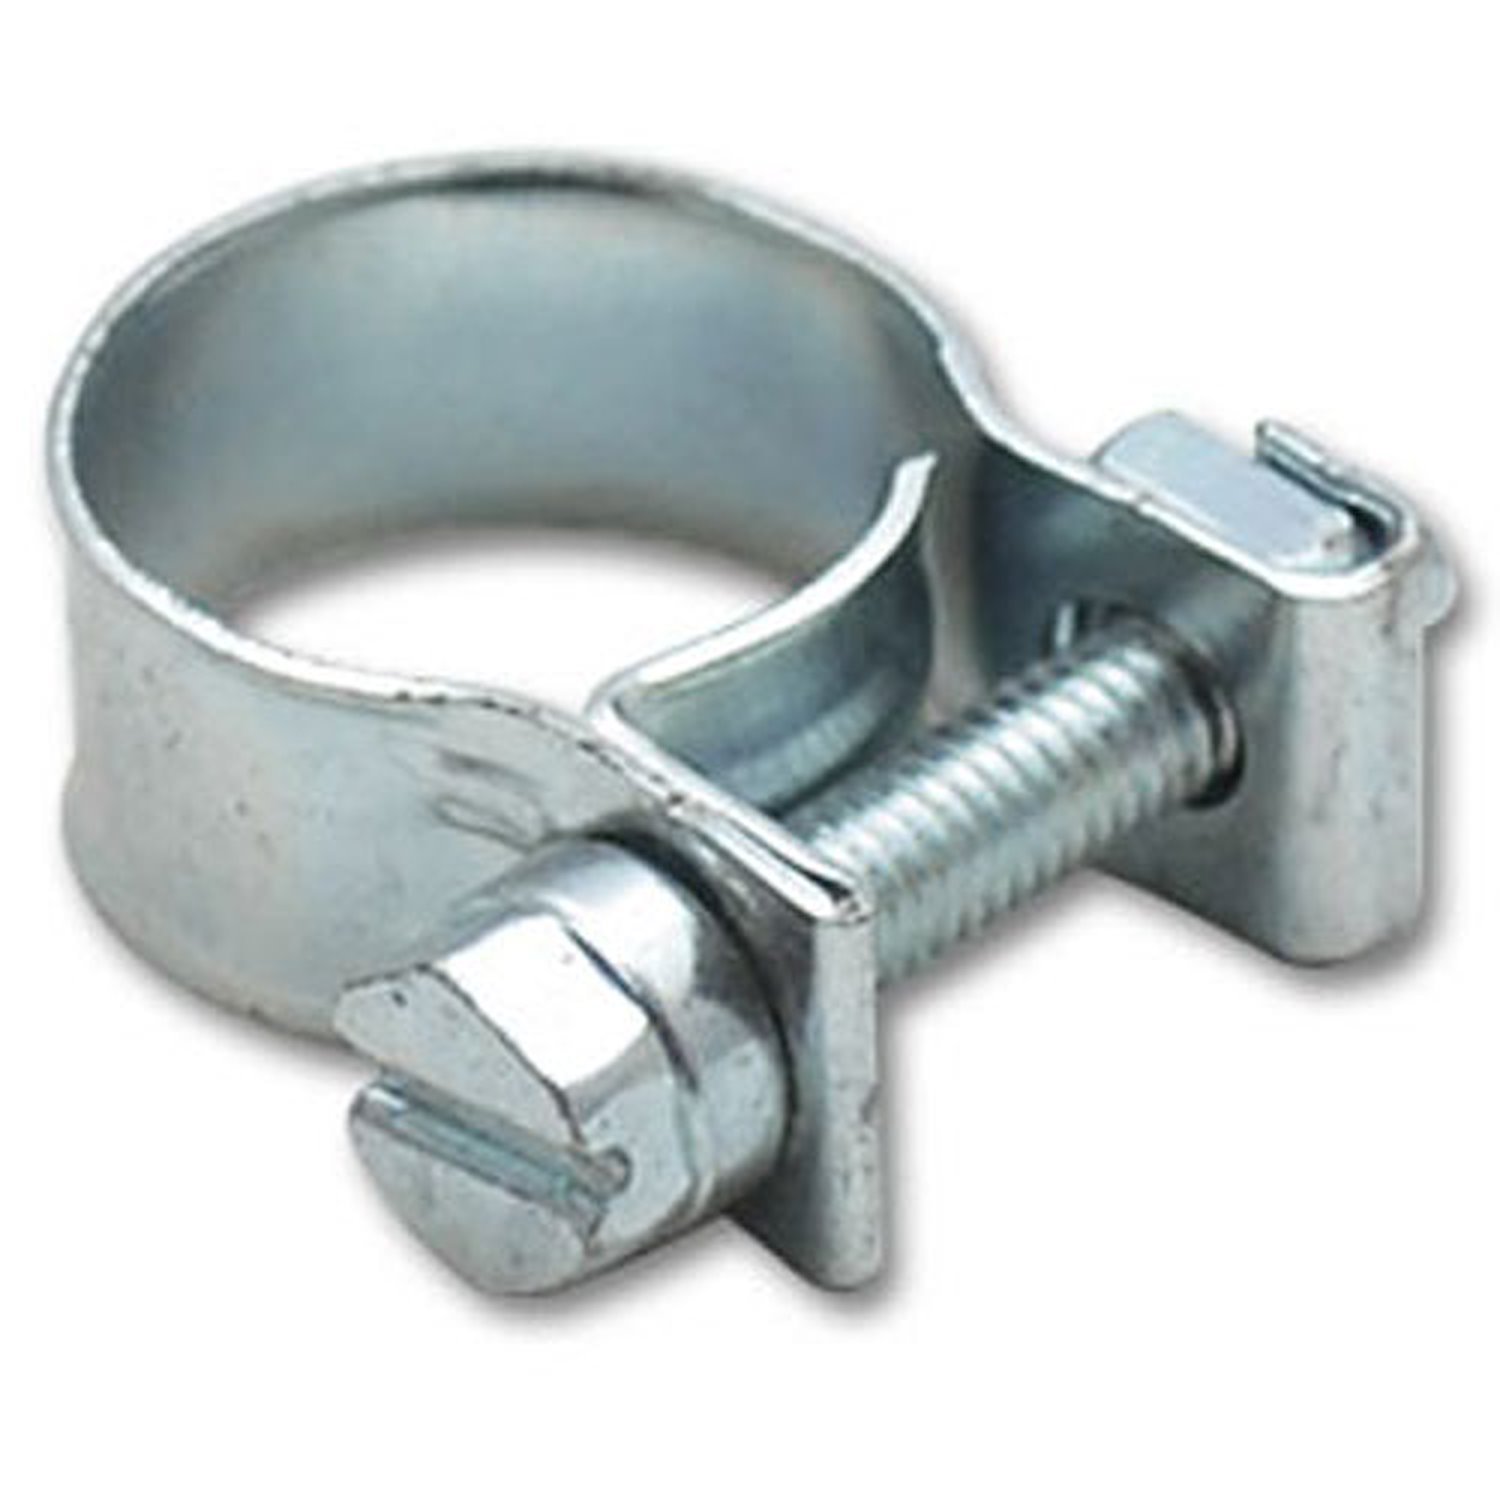 Fuel Injector Style Mini Hose Clamps 14mm - 16mm